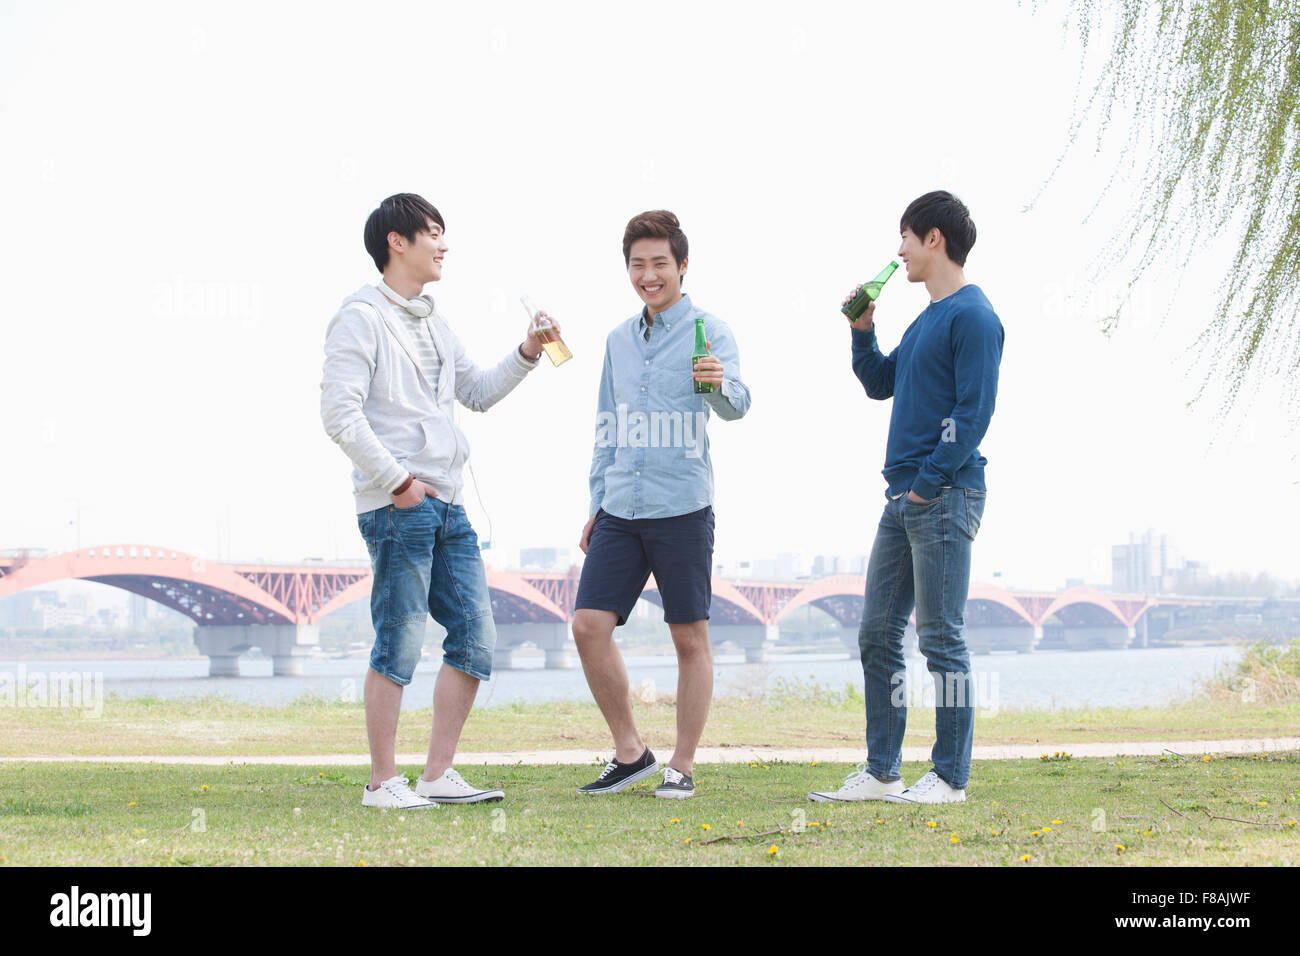 Three young men standing on grass and holding beer bottles having fun at the Han river park Stock Photo